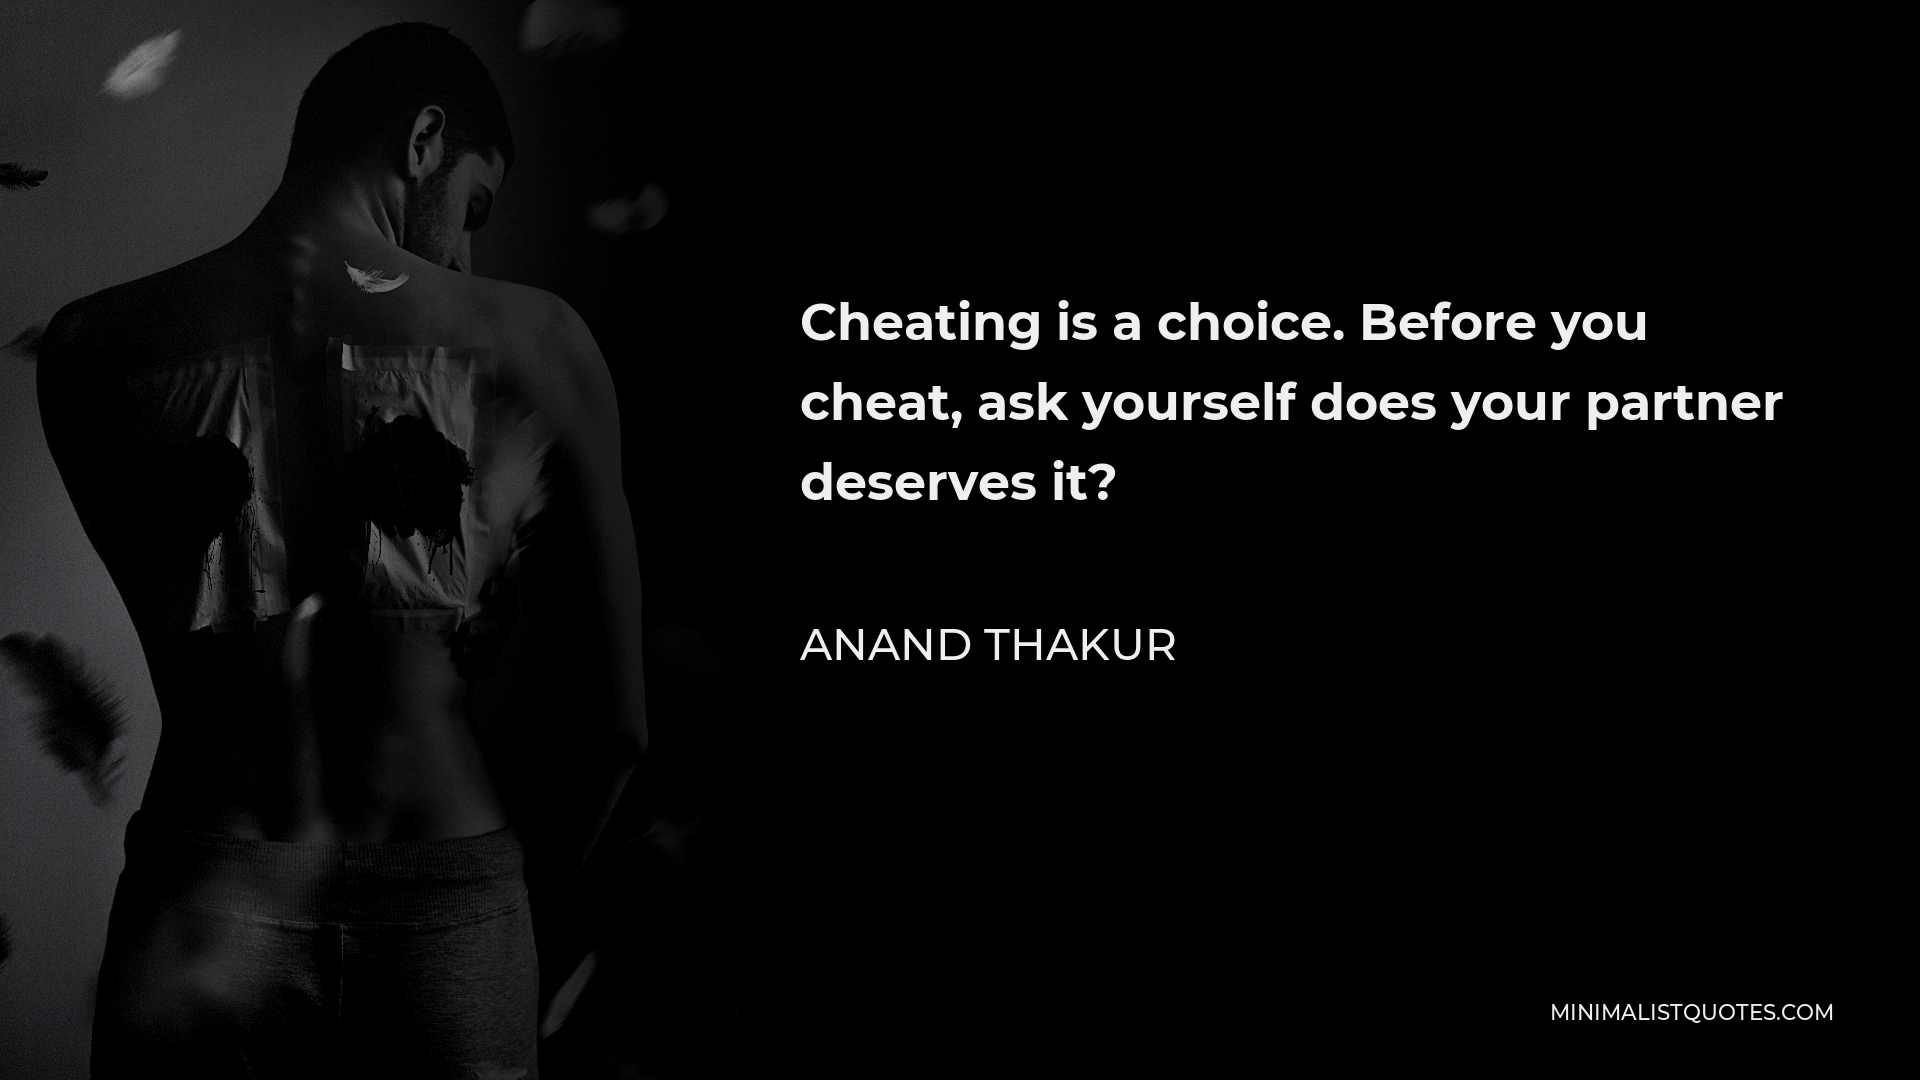 Anand Thakur Quote - Cheating is a choice. Before you cheat, ask yourself does your partner deserves it?